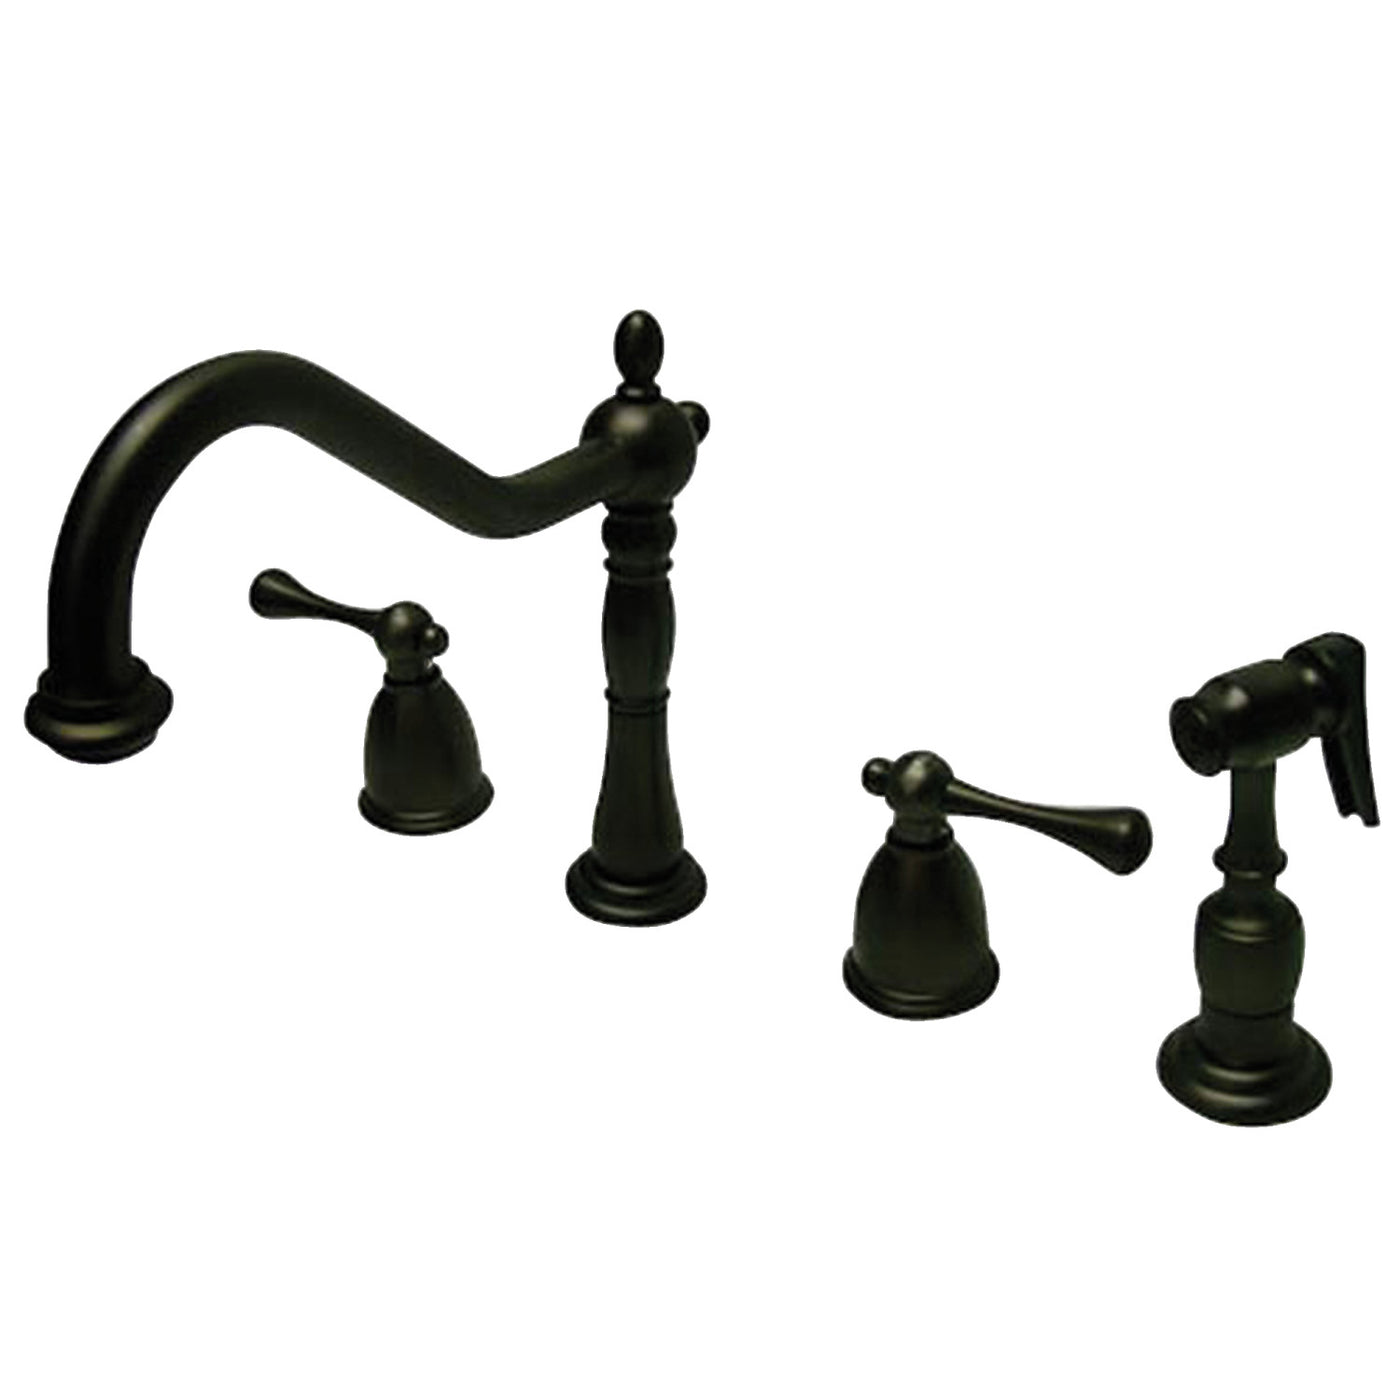 Elements of Design EB7795BLBS Widespread Kitchen Faucet with Brass Sprayer, Oil Rubbed Bronze